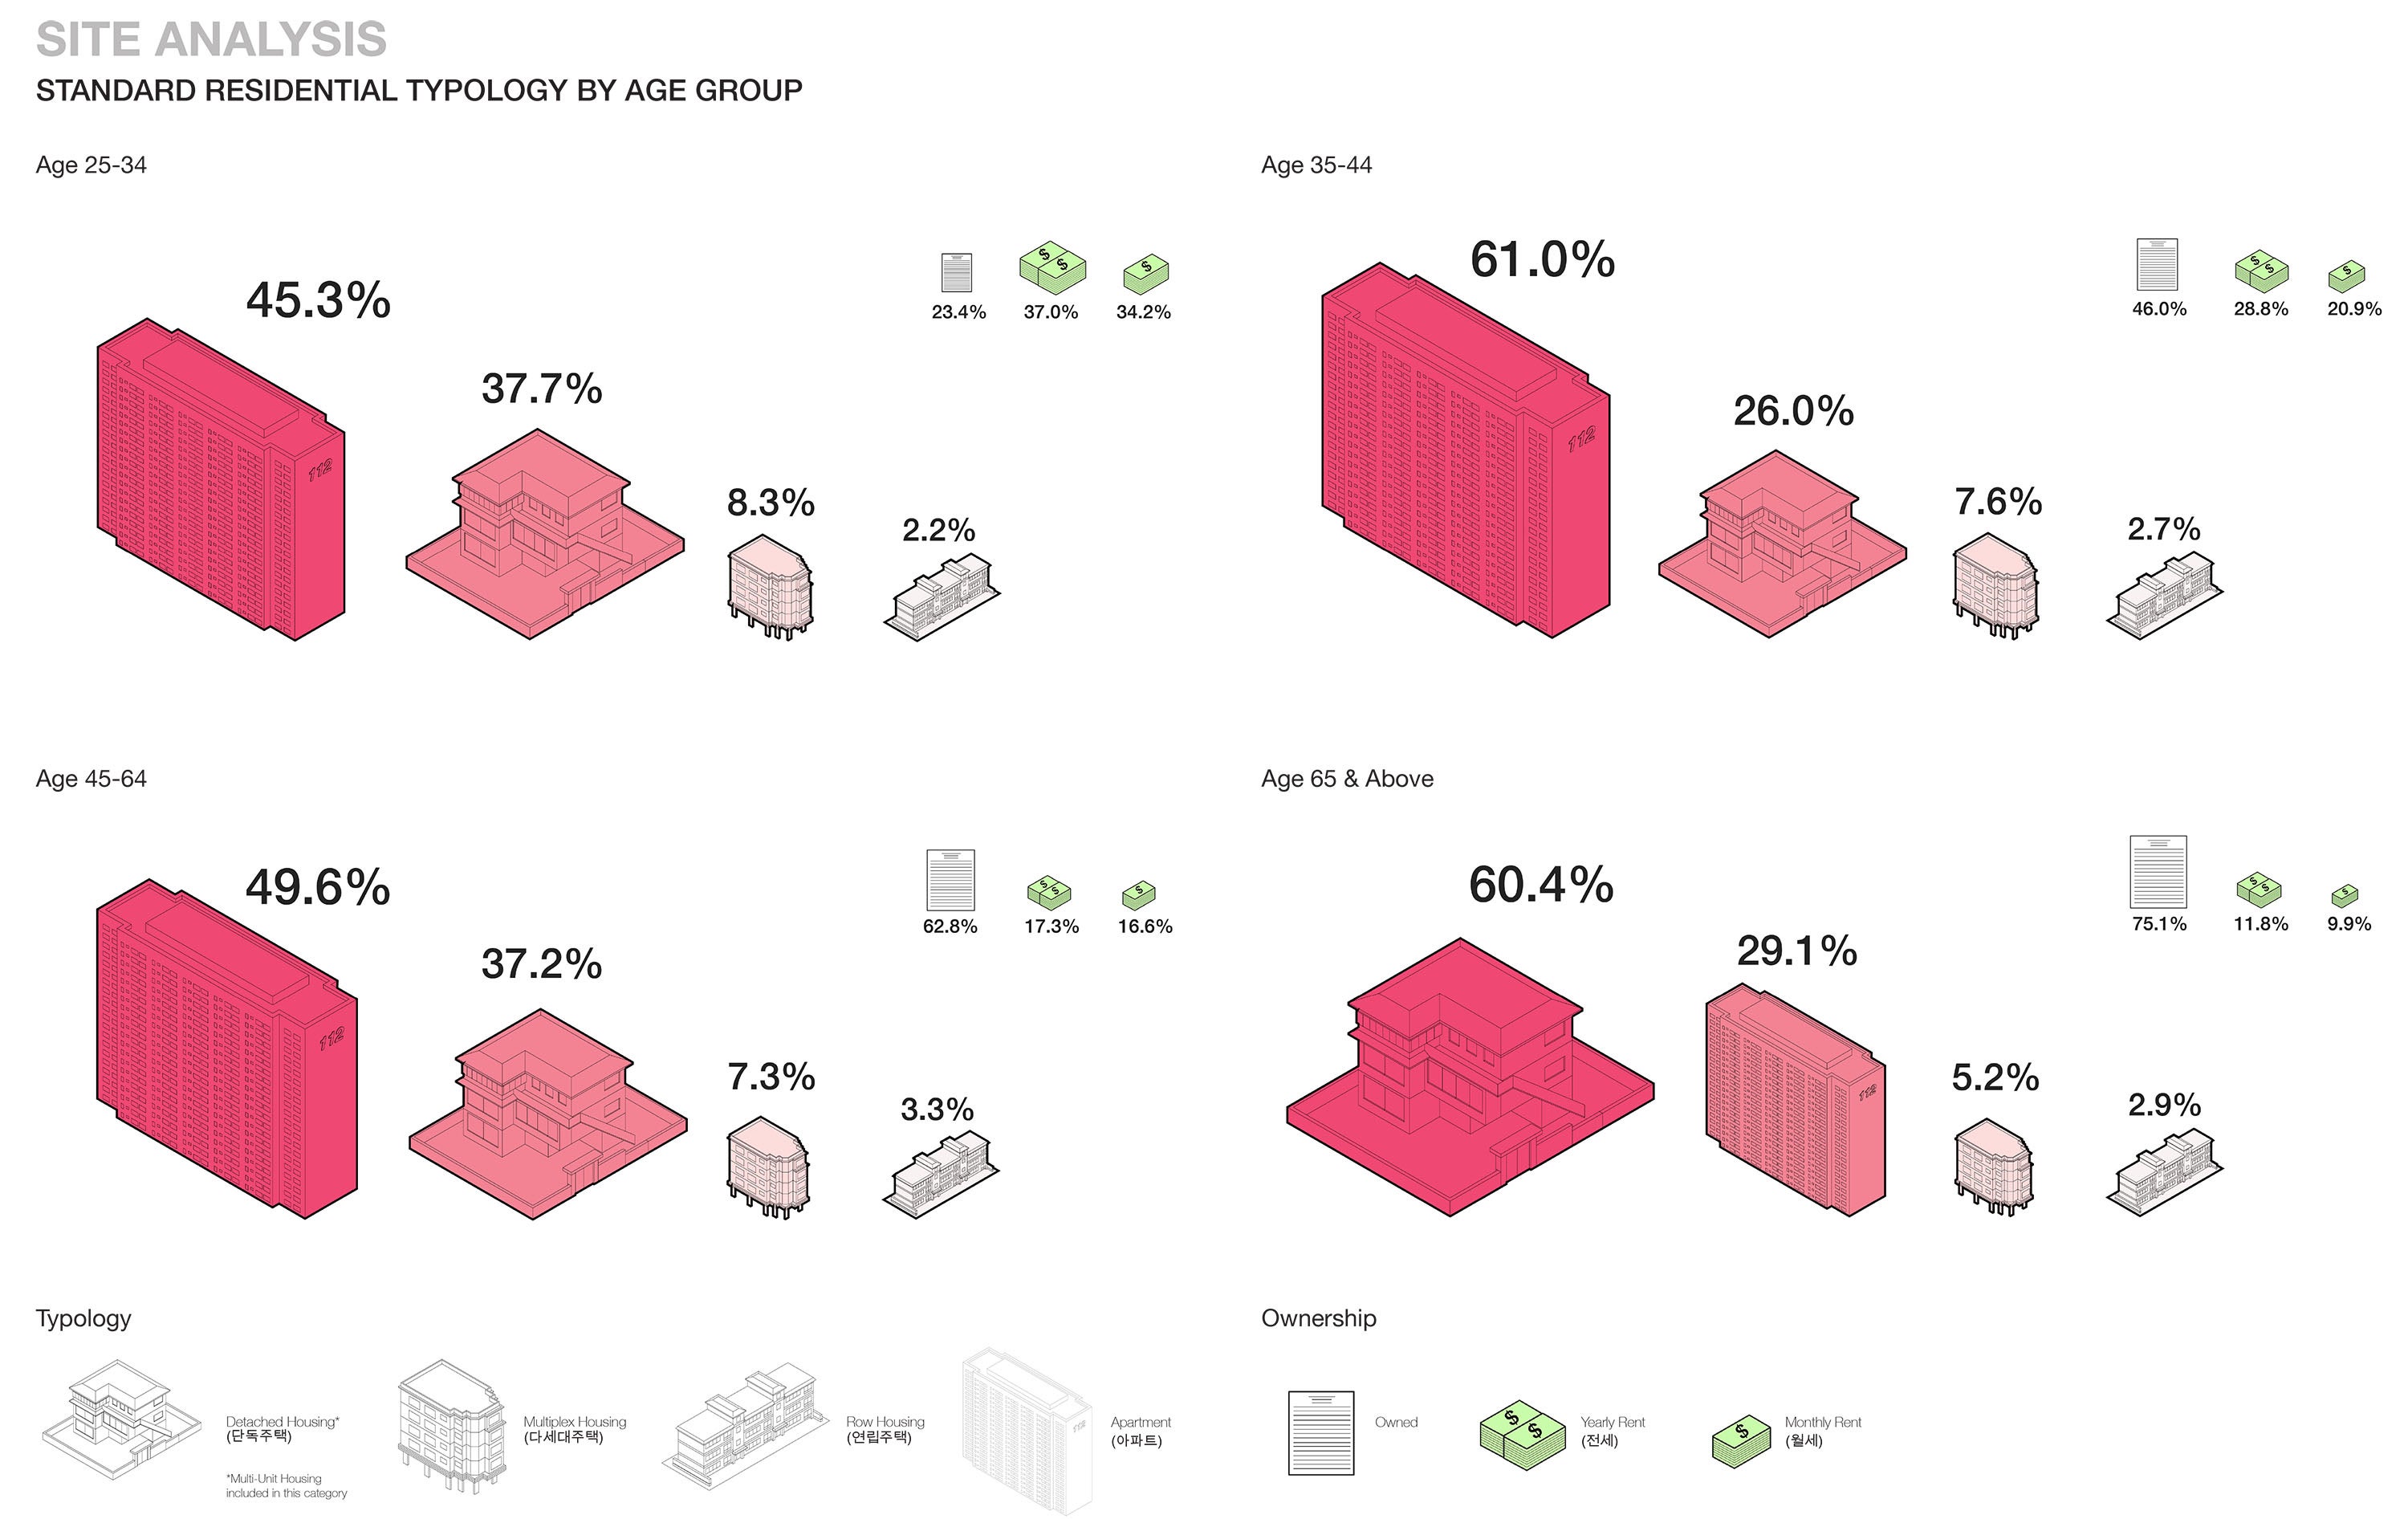 Standard residential typology by age group in Korea